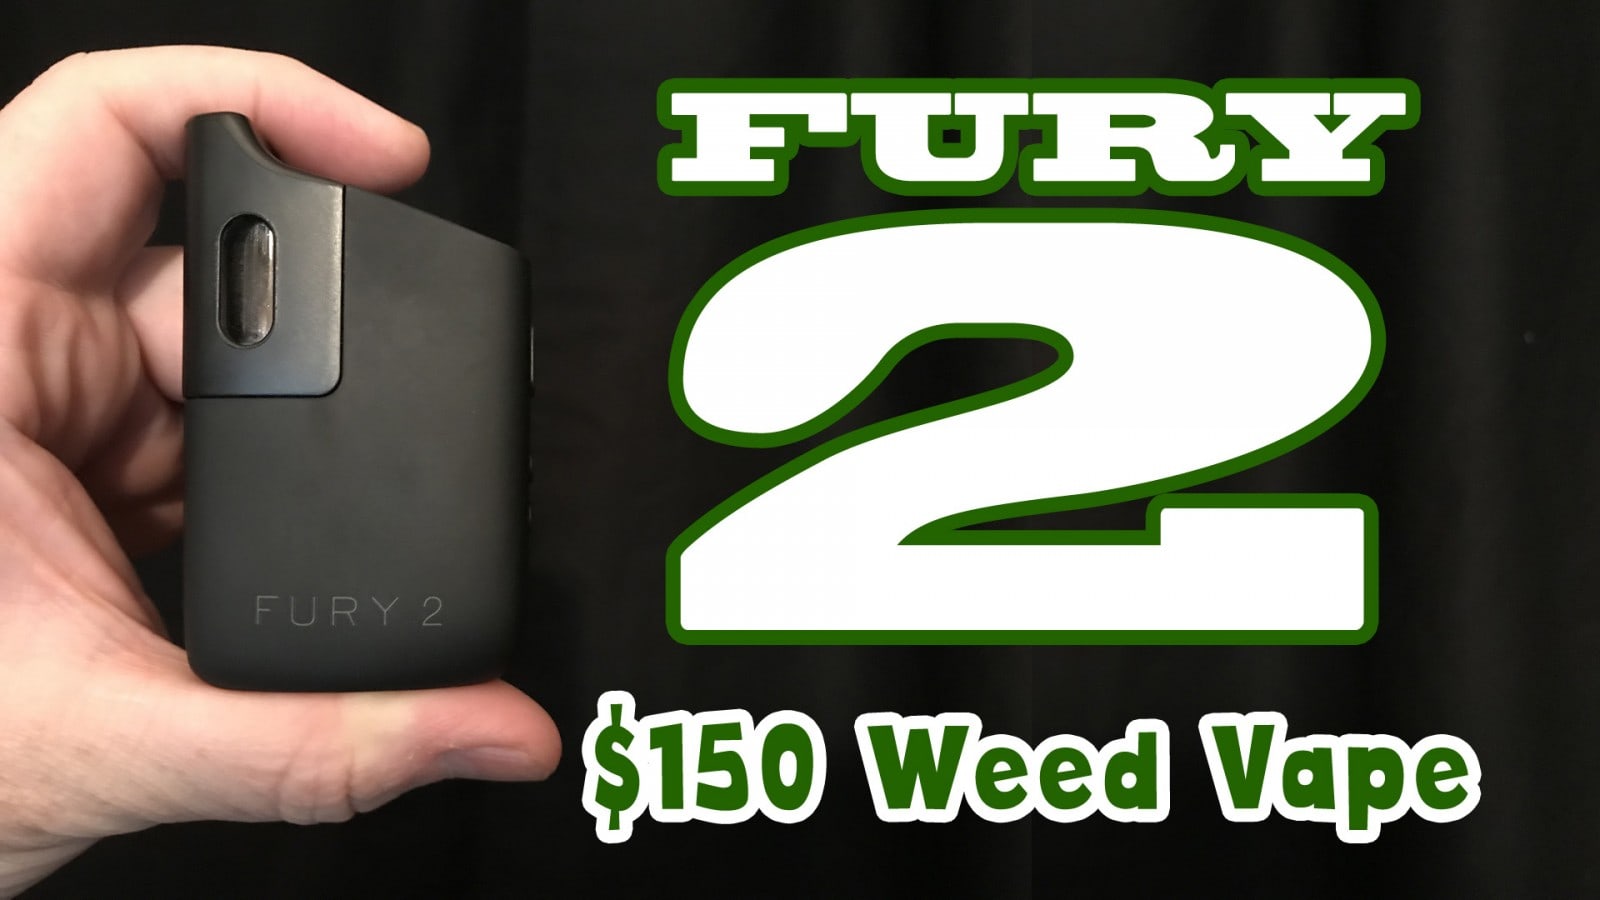 My favorite budget weed vape – Fury 2 by Healthy Rips